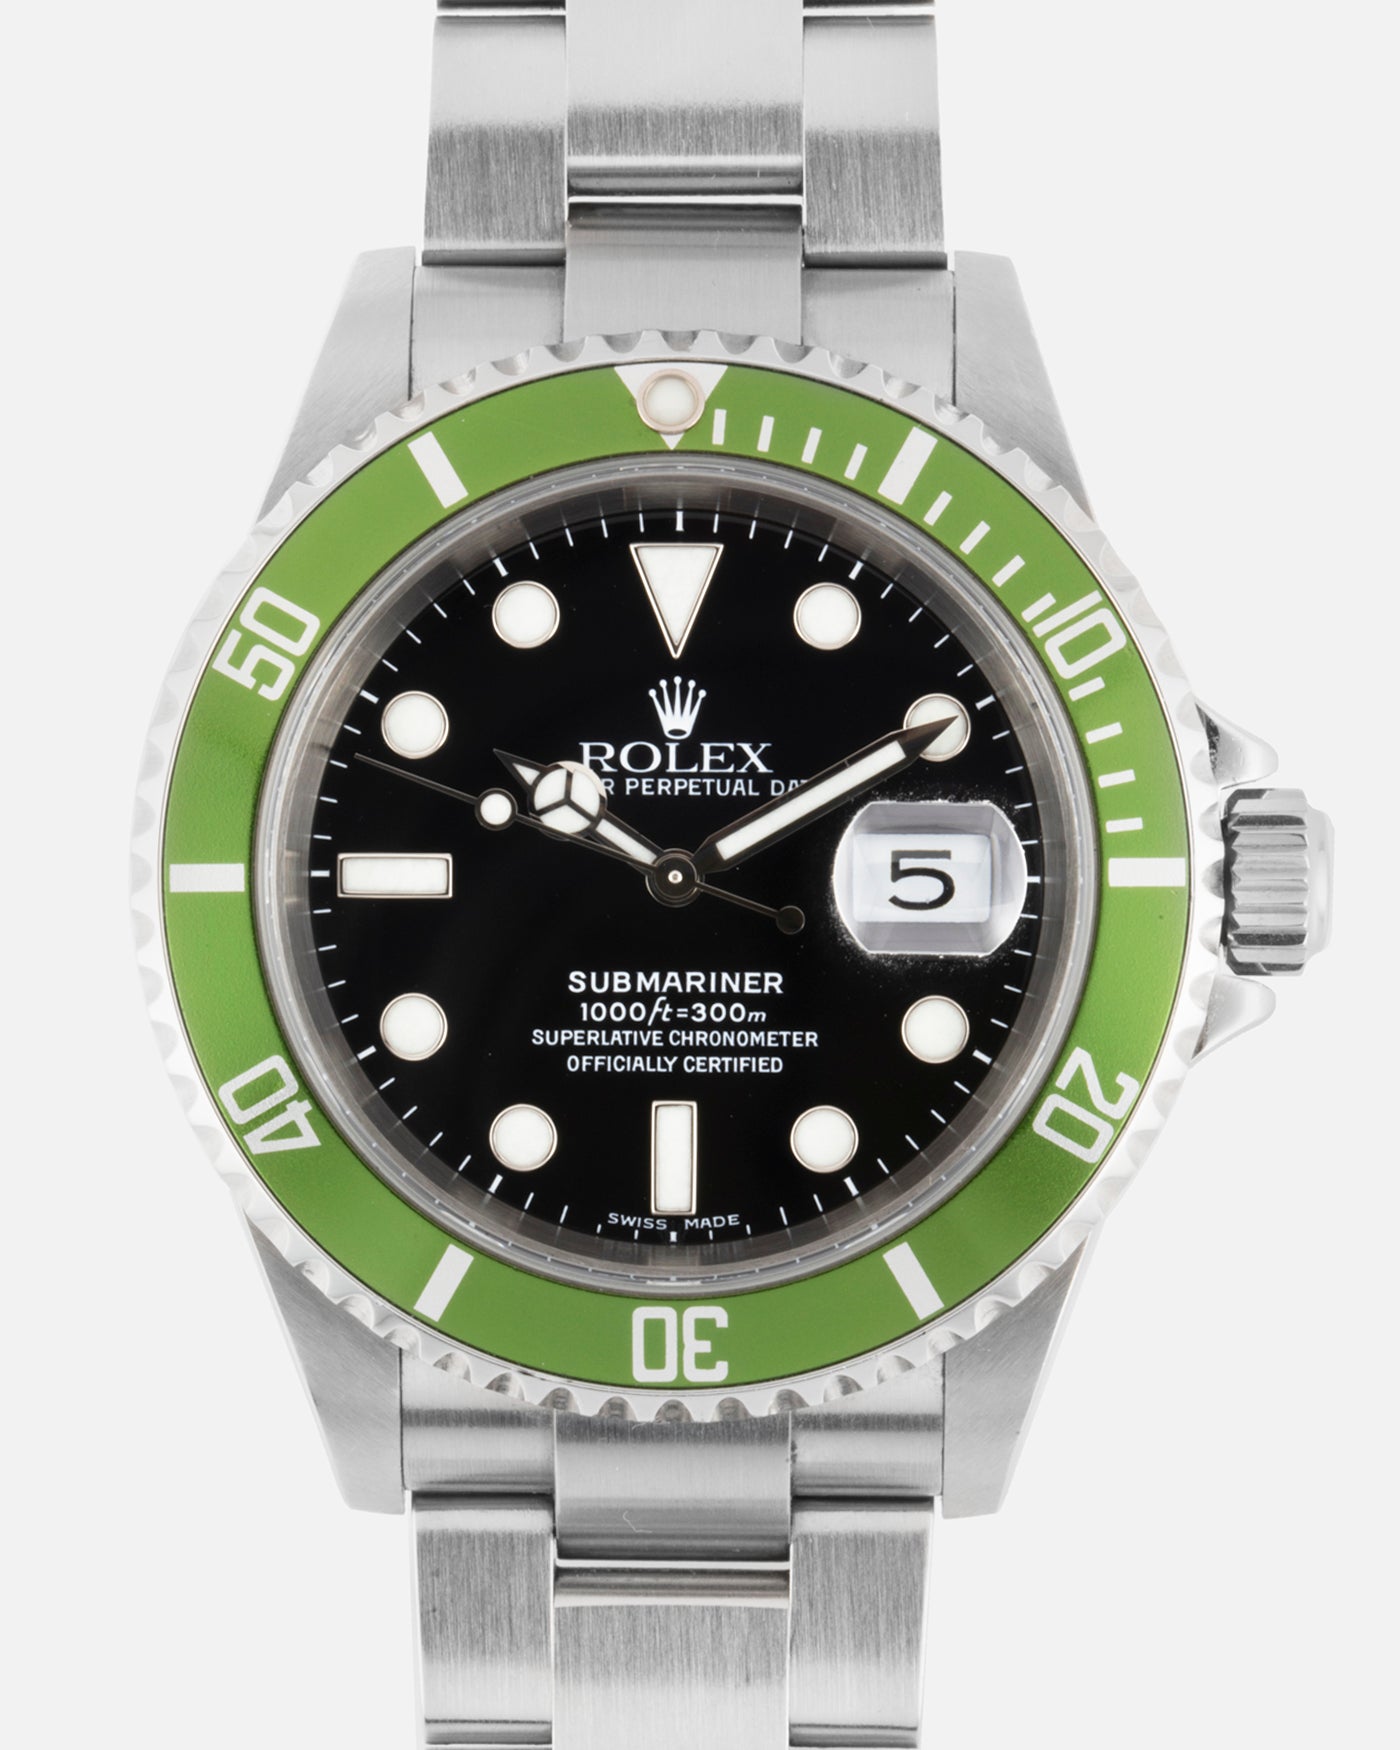 Rolex Submariner 16610LV Kermit B3 Lime Watch | S.Song Vintage